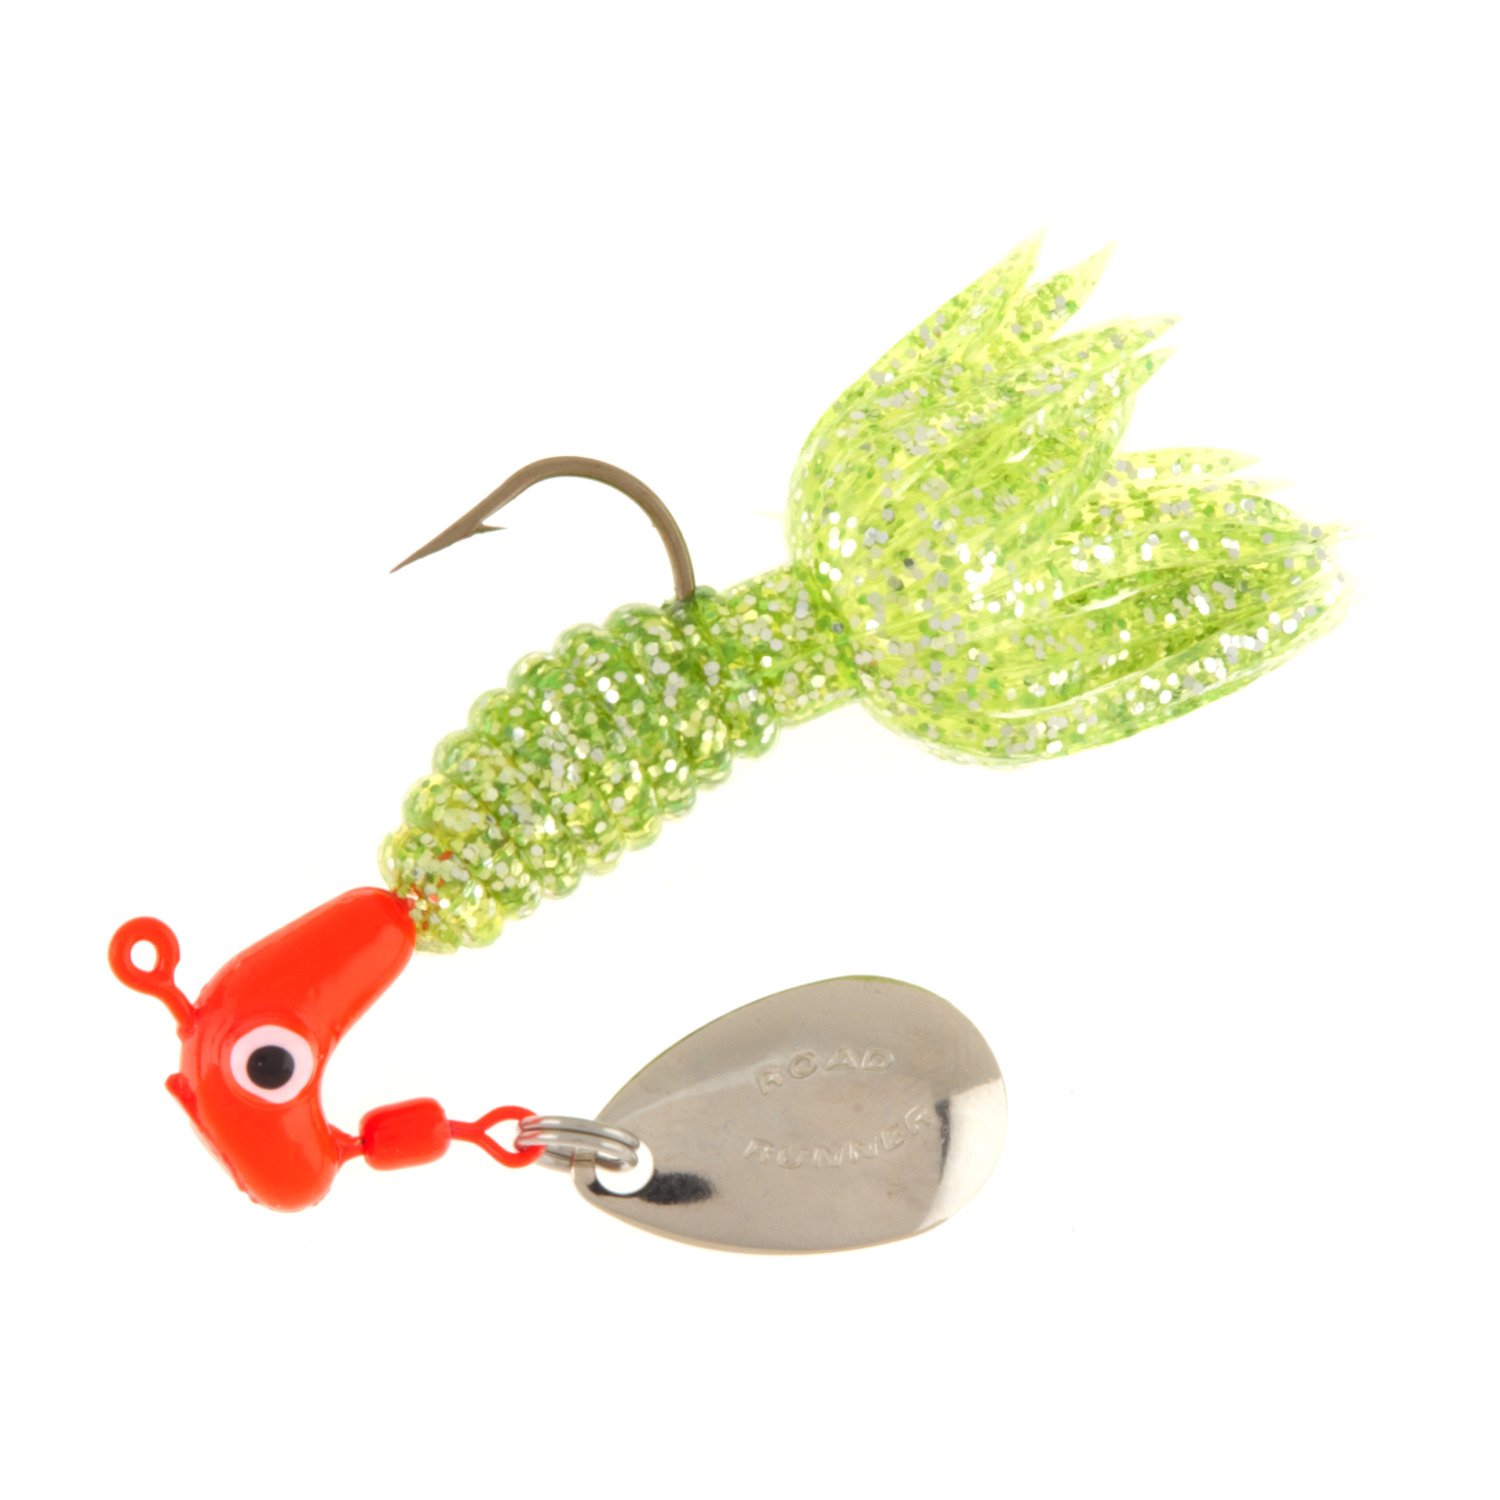 Academy Sports + Outdoors Blakemore Road Runner Crappie Thunder 1/8 oz.  Panfish Jigs 2-Pack